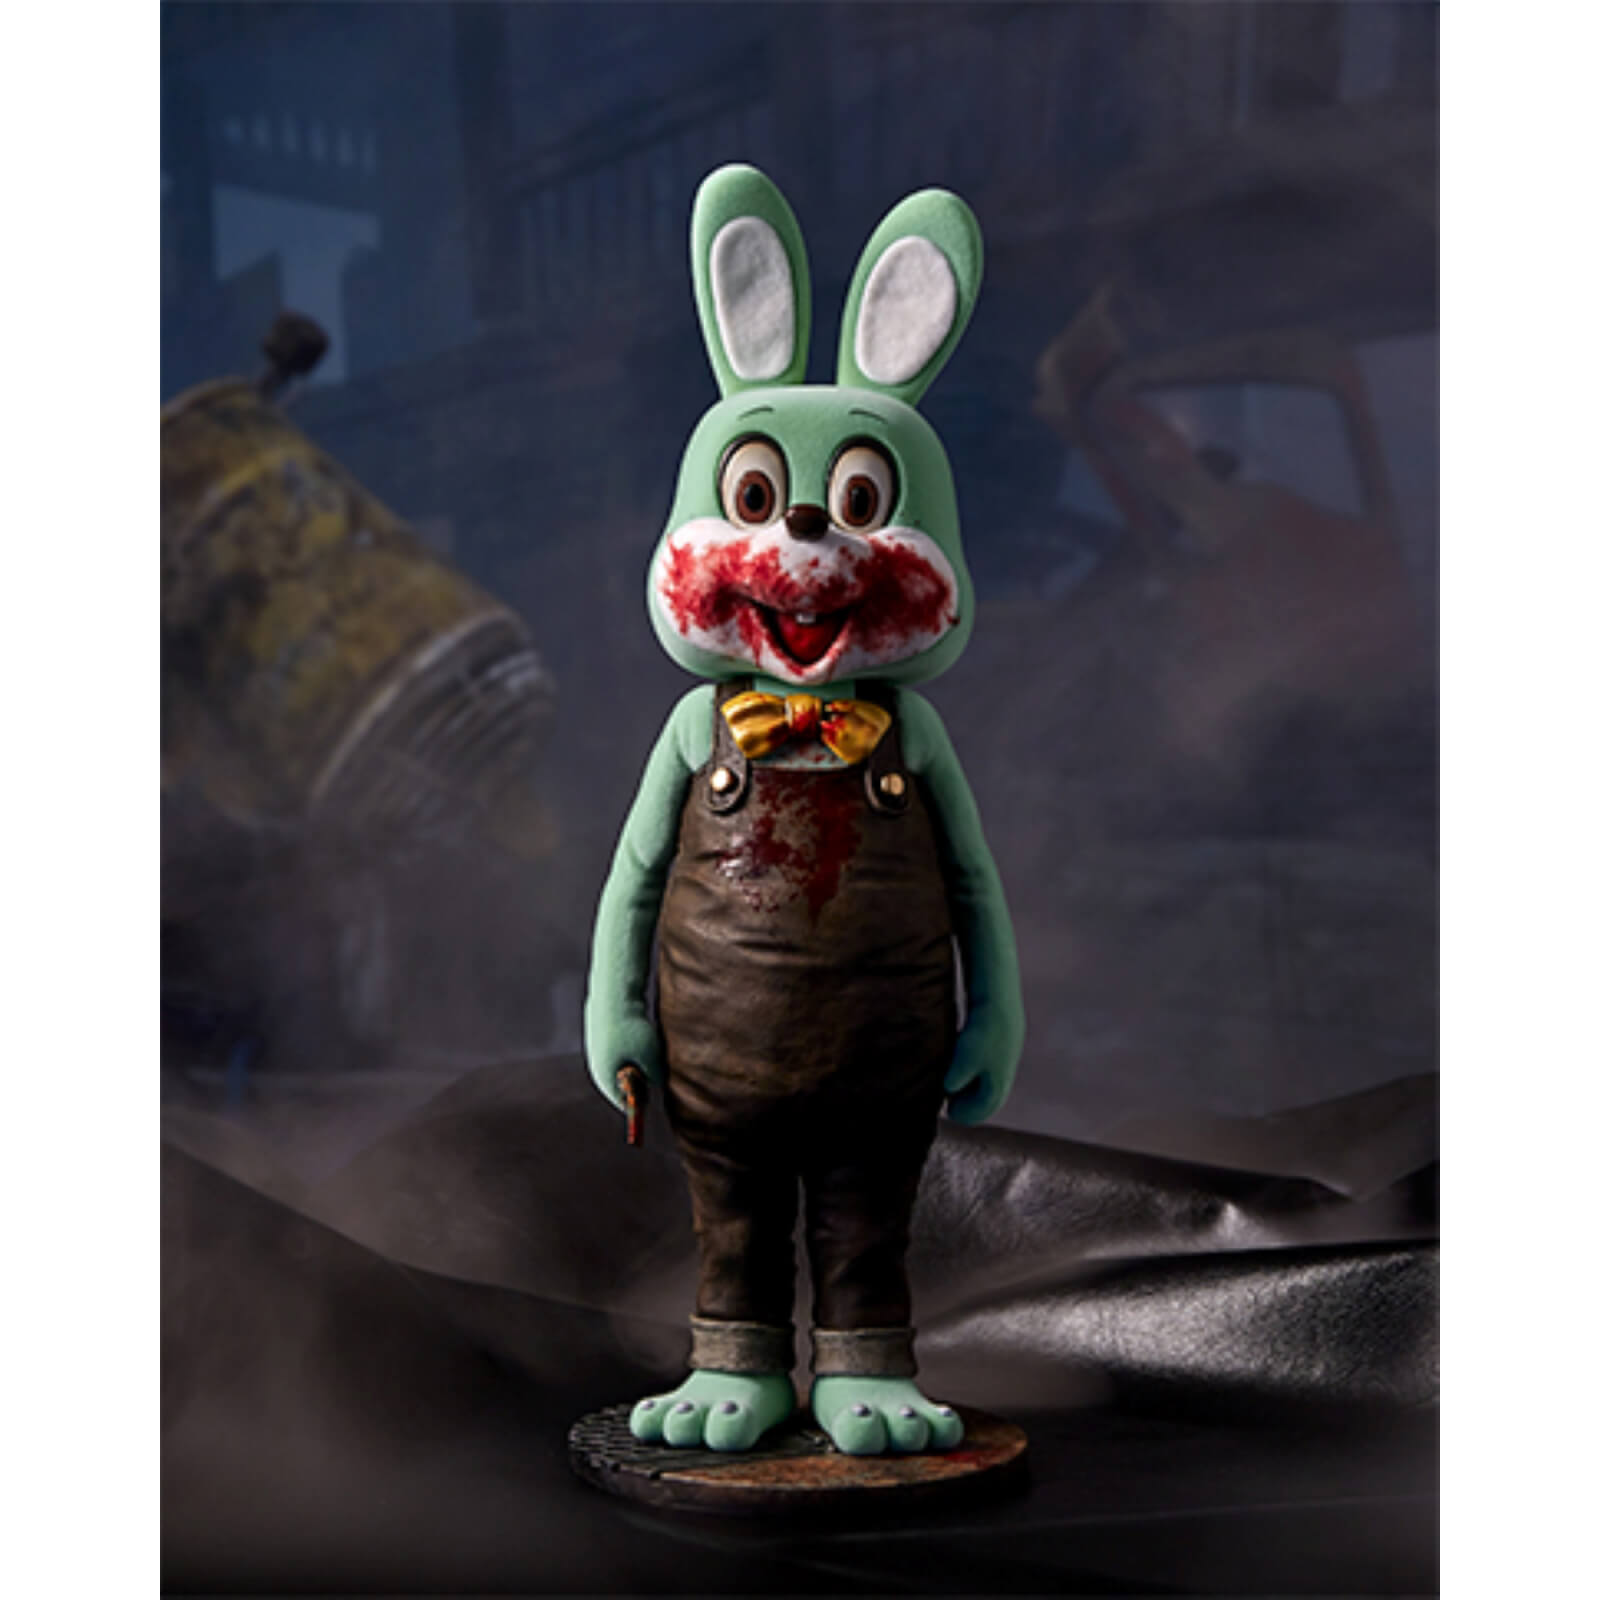 Silent Hill x Dead by Daylight 1/6 Scale Premium Statue - Robbie The Rabbit (Green Version)